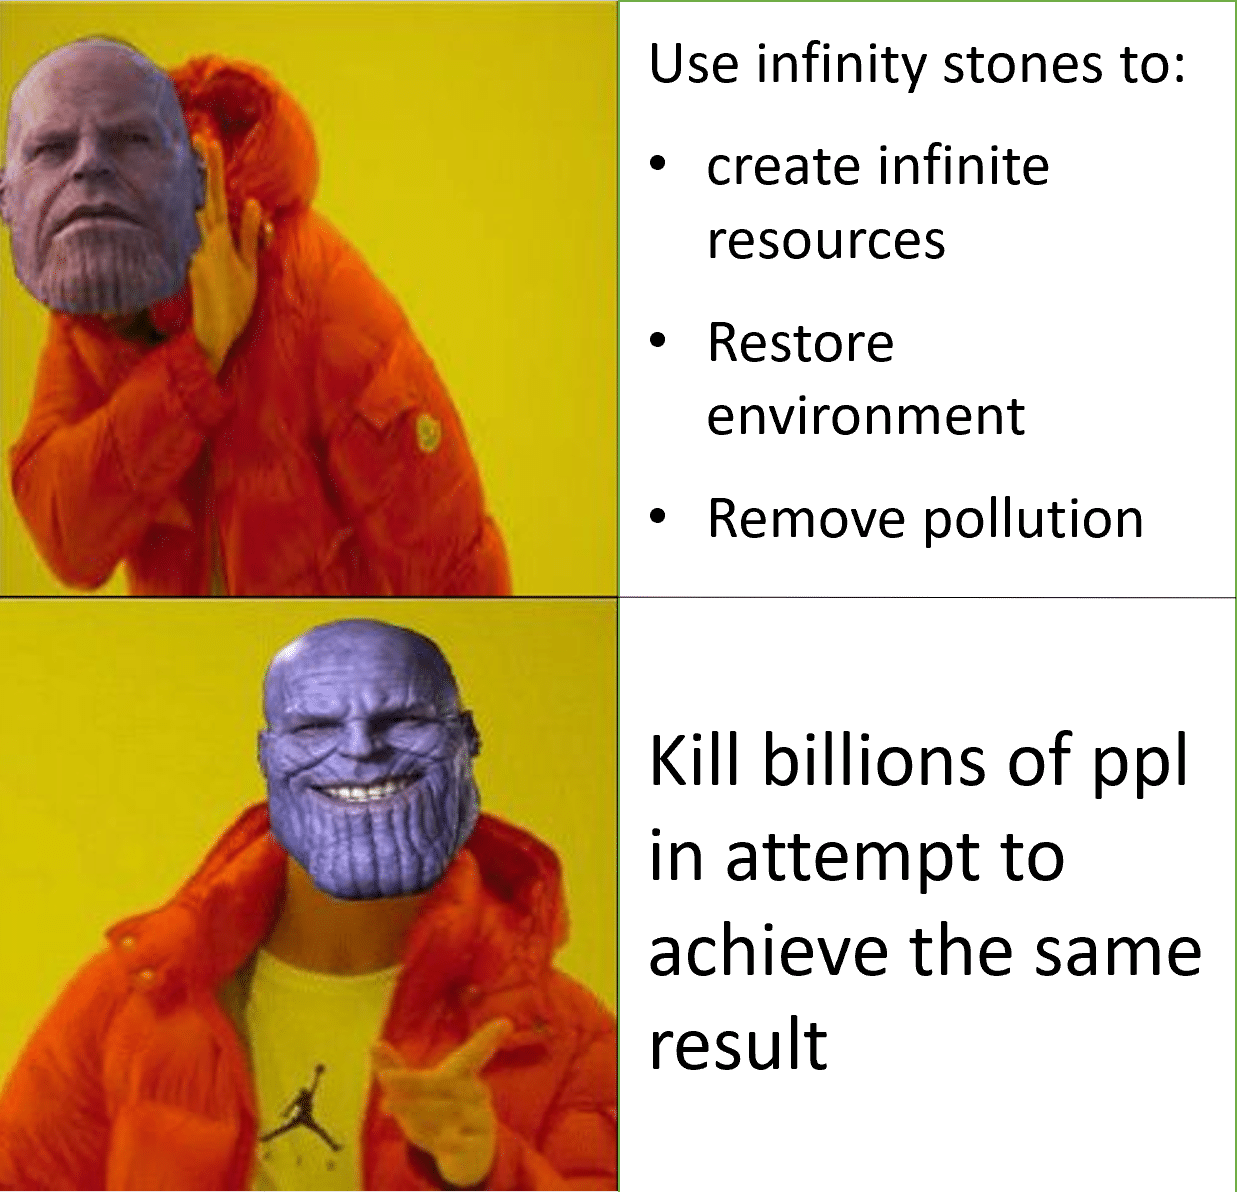 Thanos, Thanos, Hudson, ErCy, Endgame Avengers Memes Thanos, Thanos, Hudson, ErCy, Endgame text: Use infinity stones to: ' create infinite resources environment ' Remove pollution Kill billions of PPI in attempt to achieve the result 